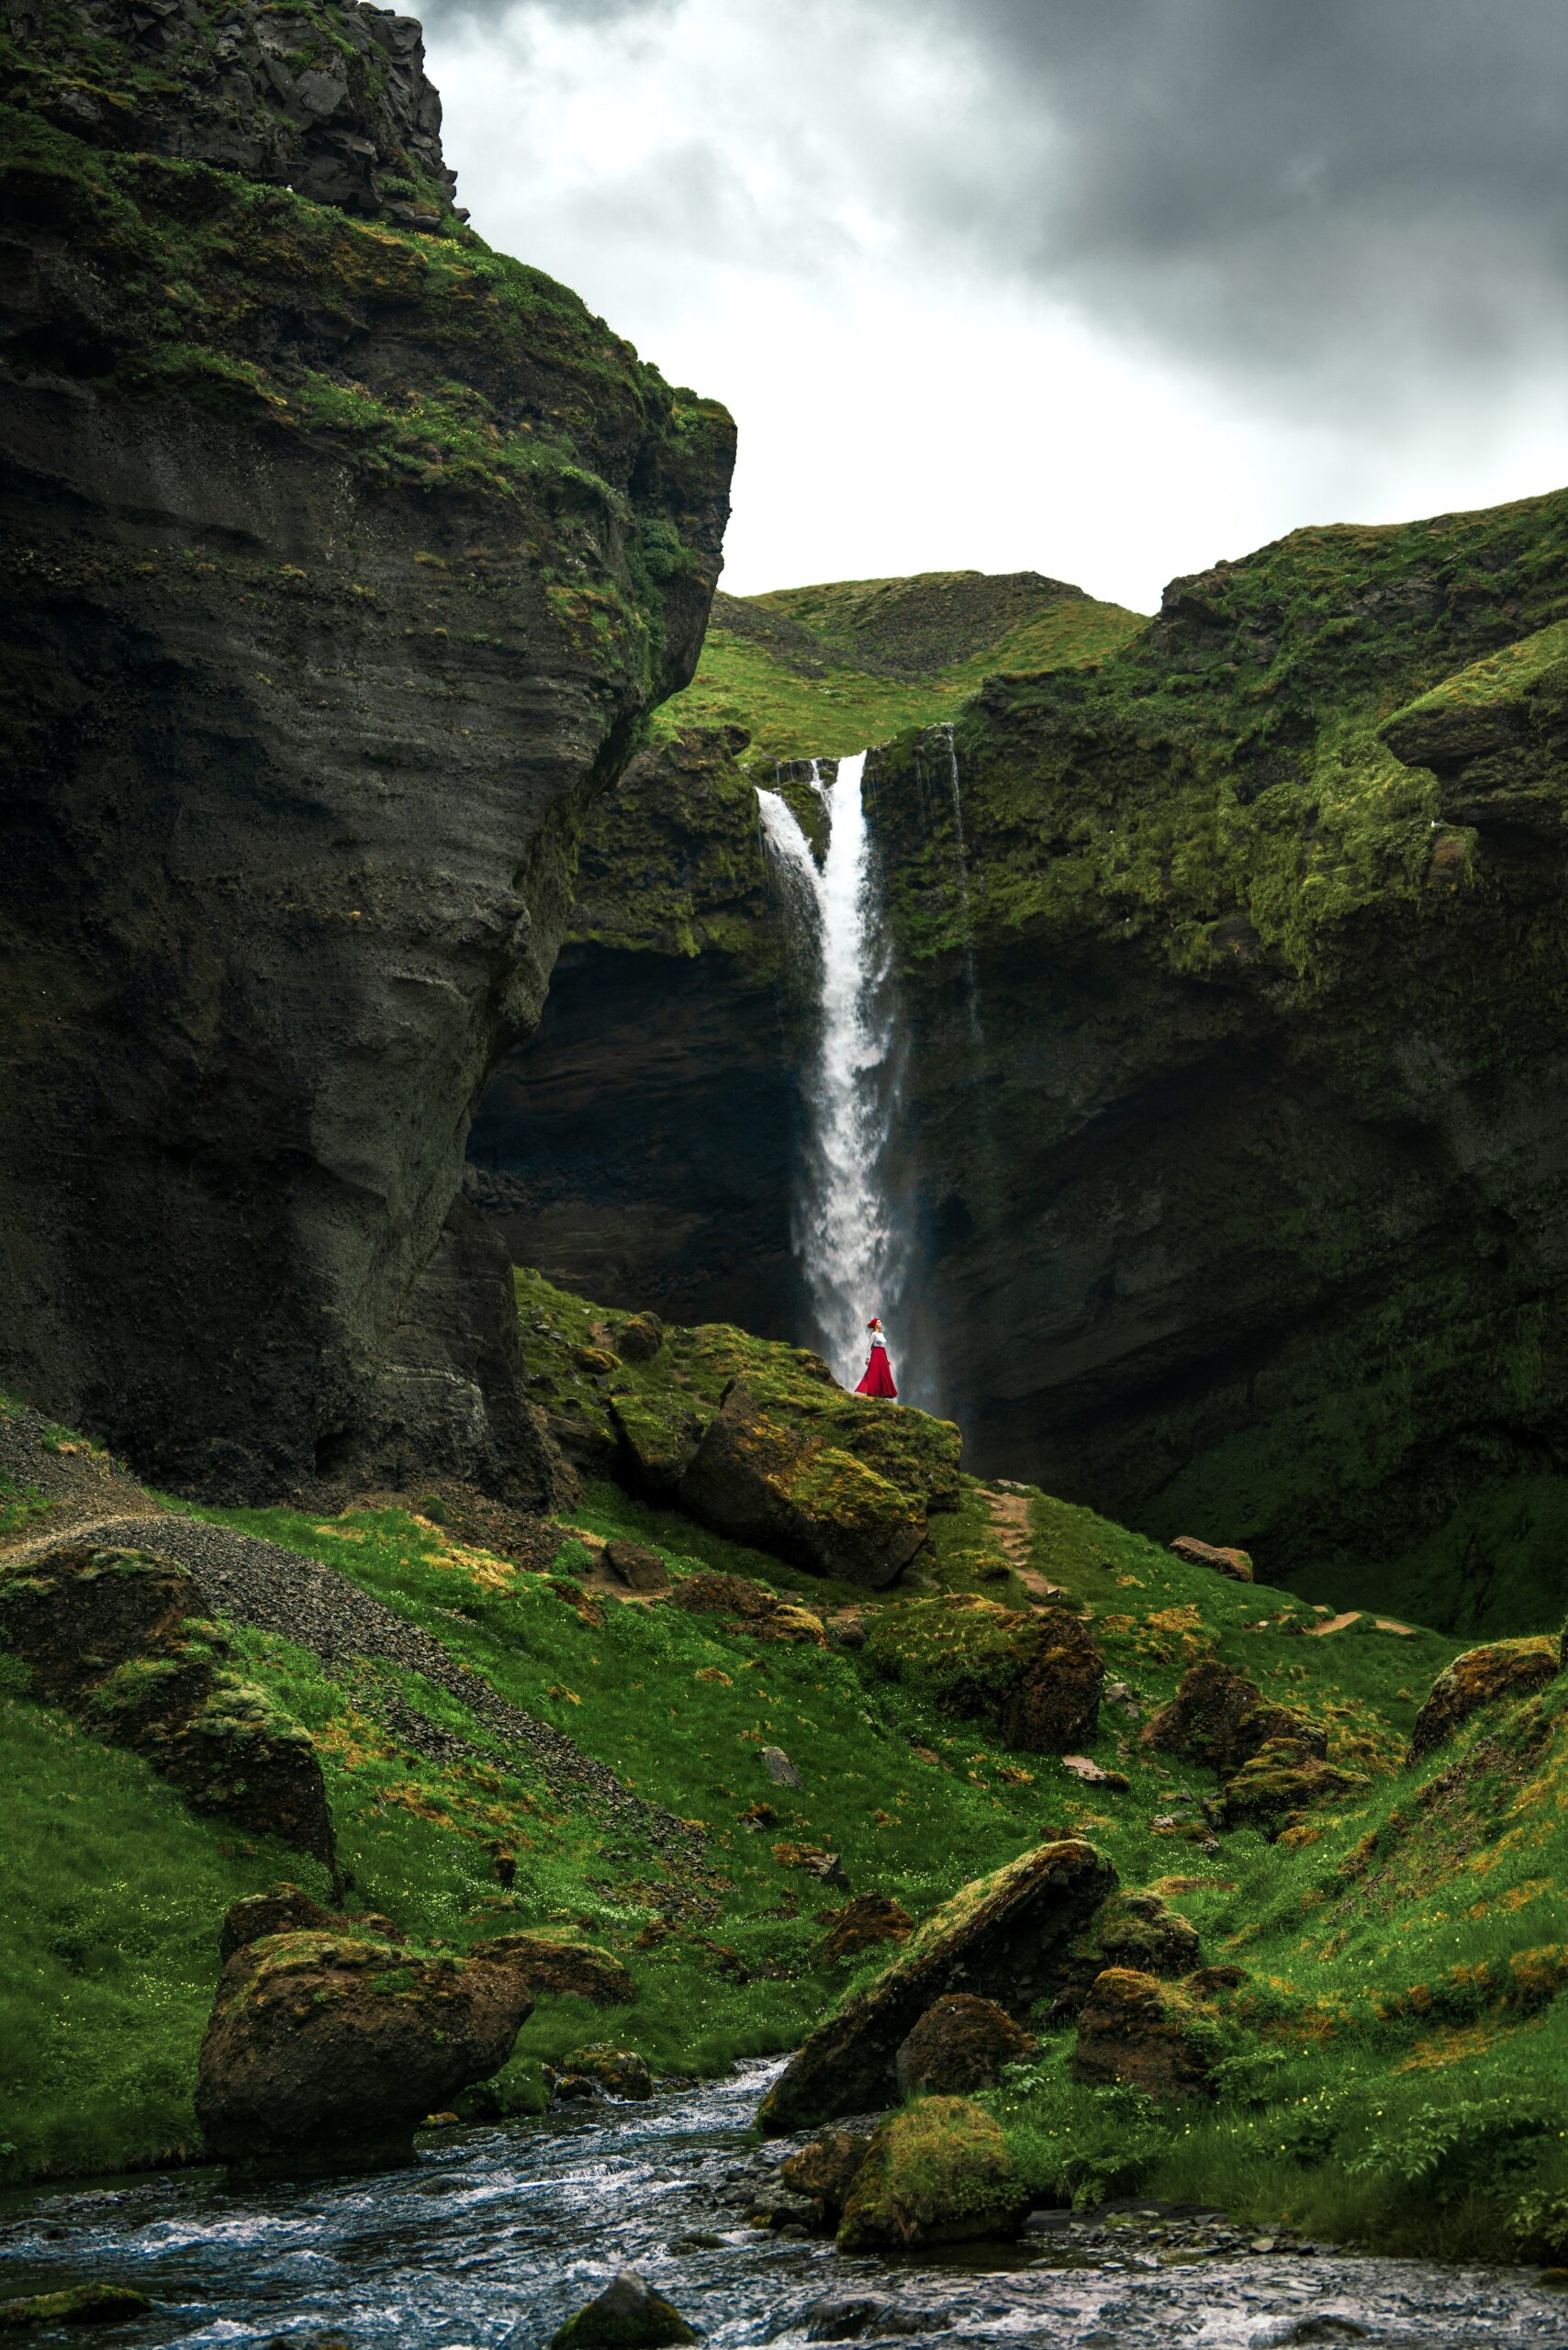 a waterfall is falling down from a cliff above where a woman is standing, she is wearing a long red skirt 